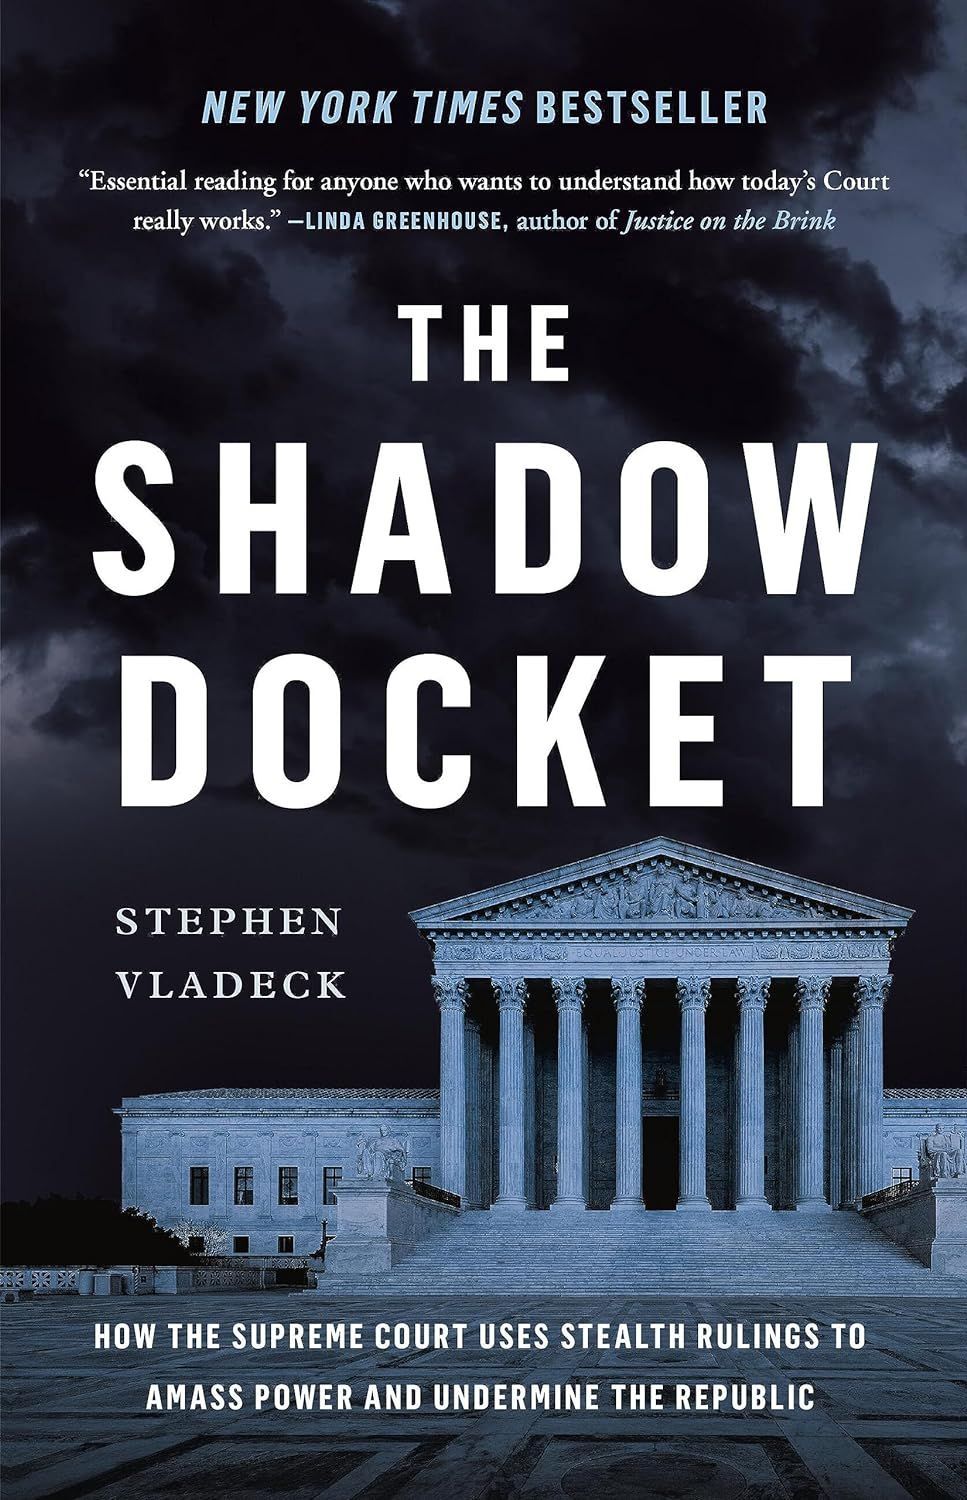 The Law-Breaking Supreme Court: On Stephen Vladeck’s “The Shadow Docket”